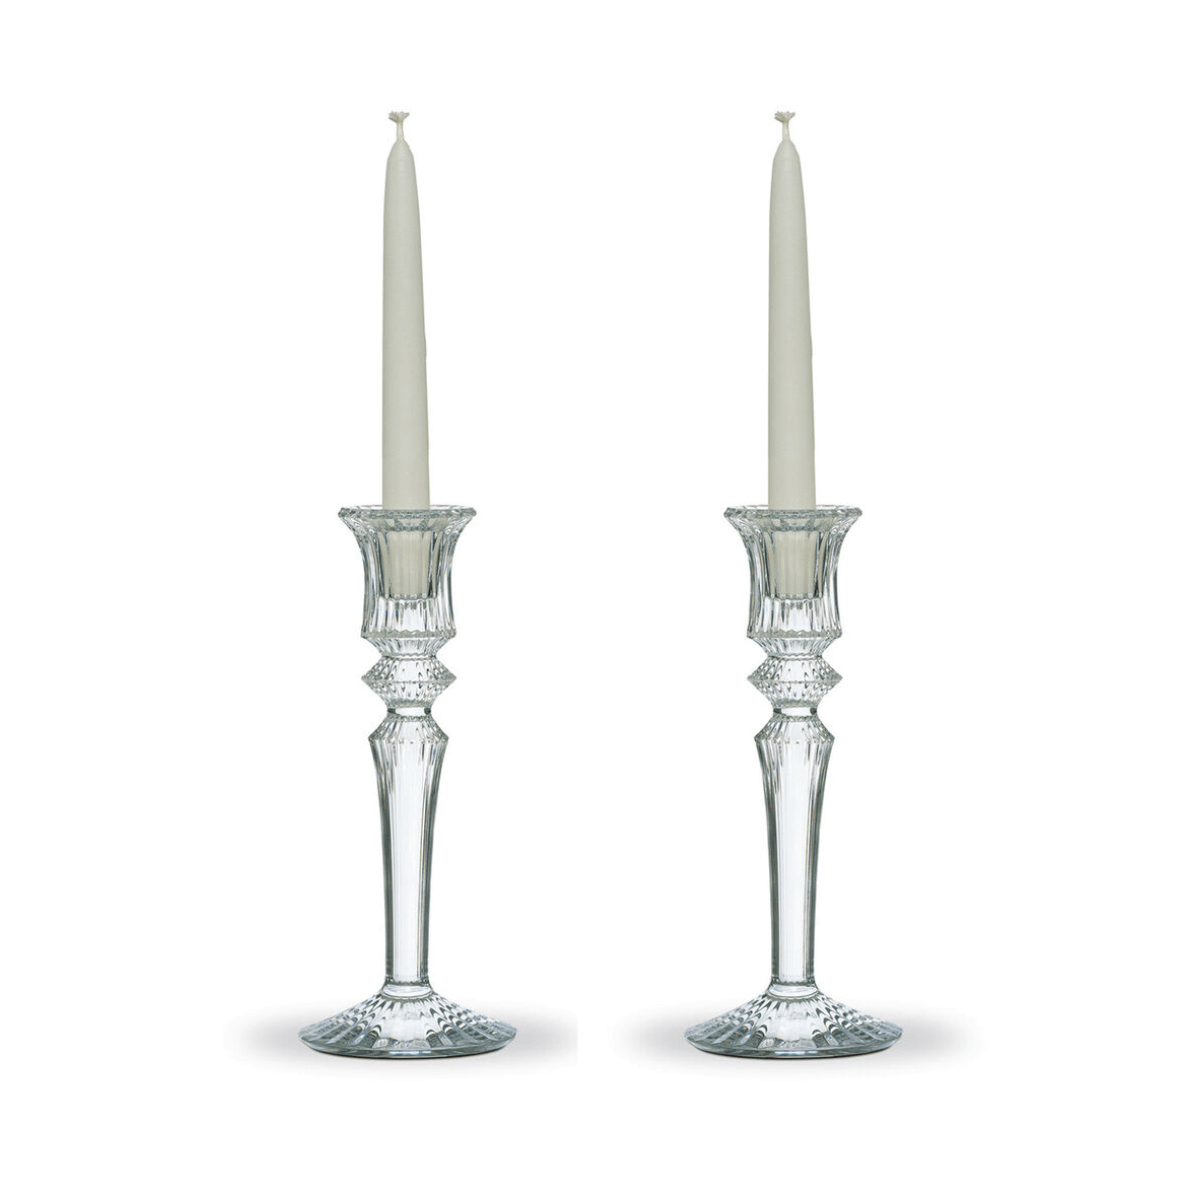 Baccarat Mille Nuits Candlesticks, pair 0